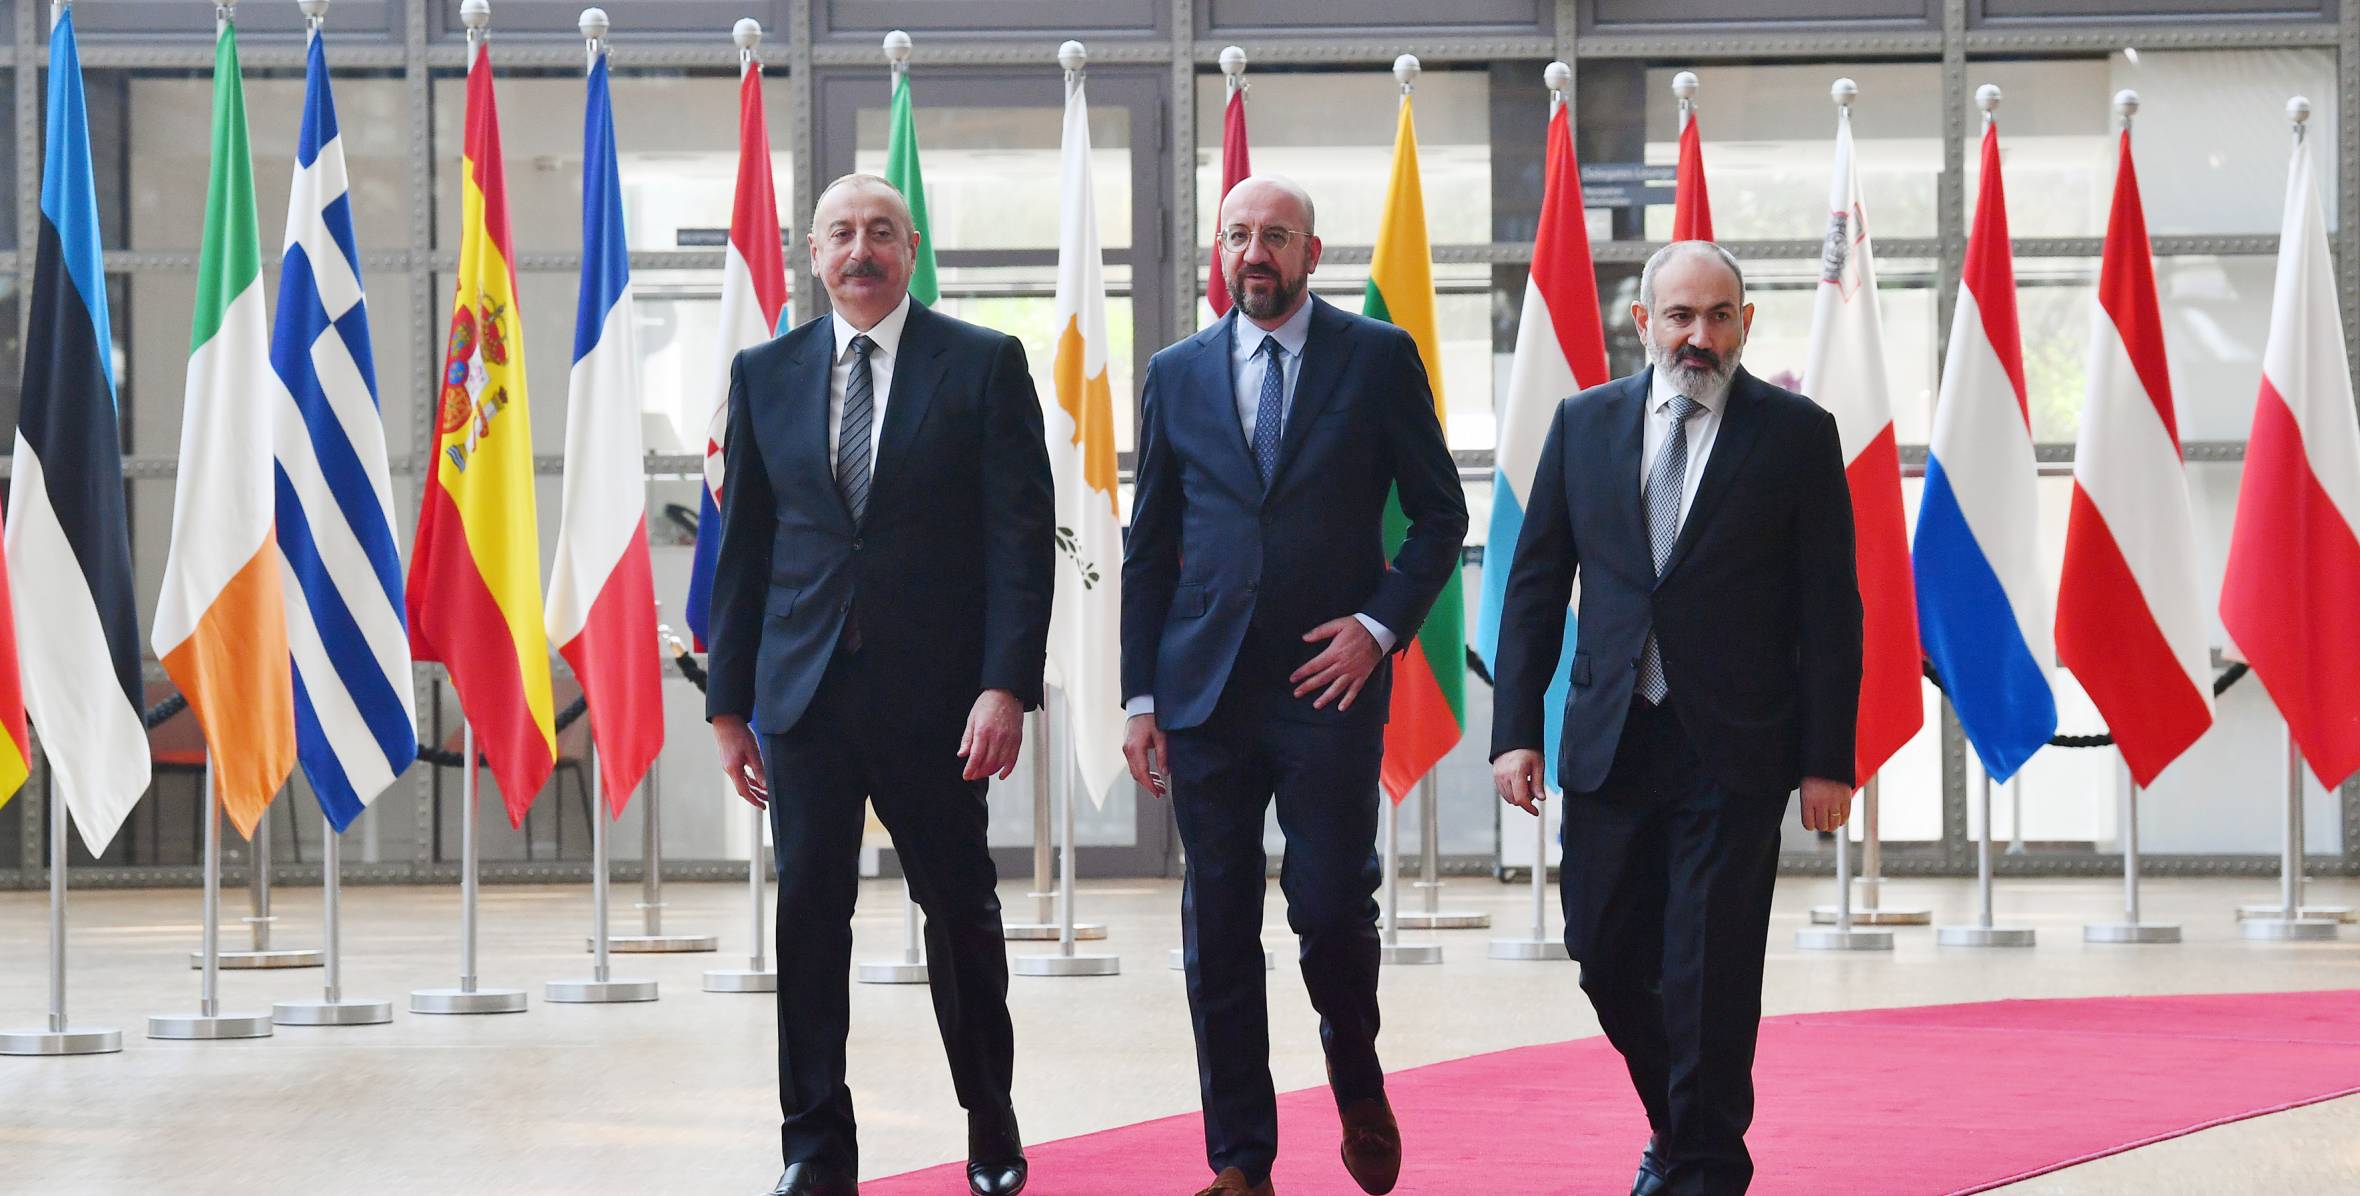 Ilham Aliyev held meeting with President of European Council and Prime Minister of Armenia in Brussels